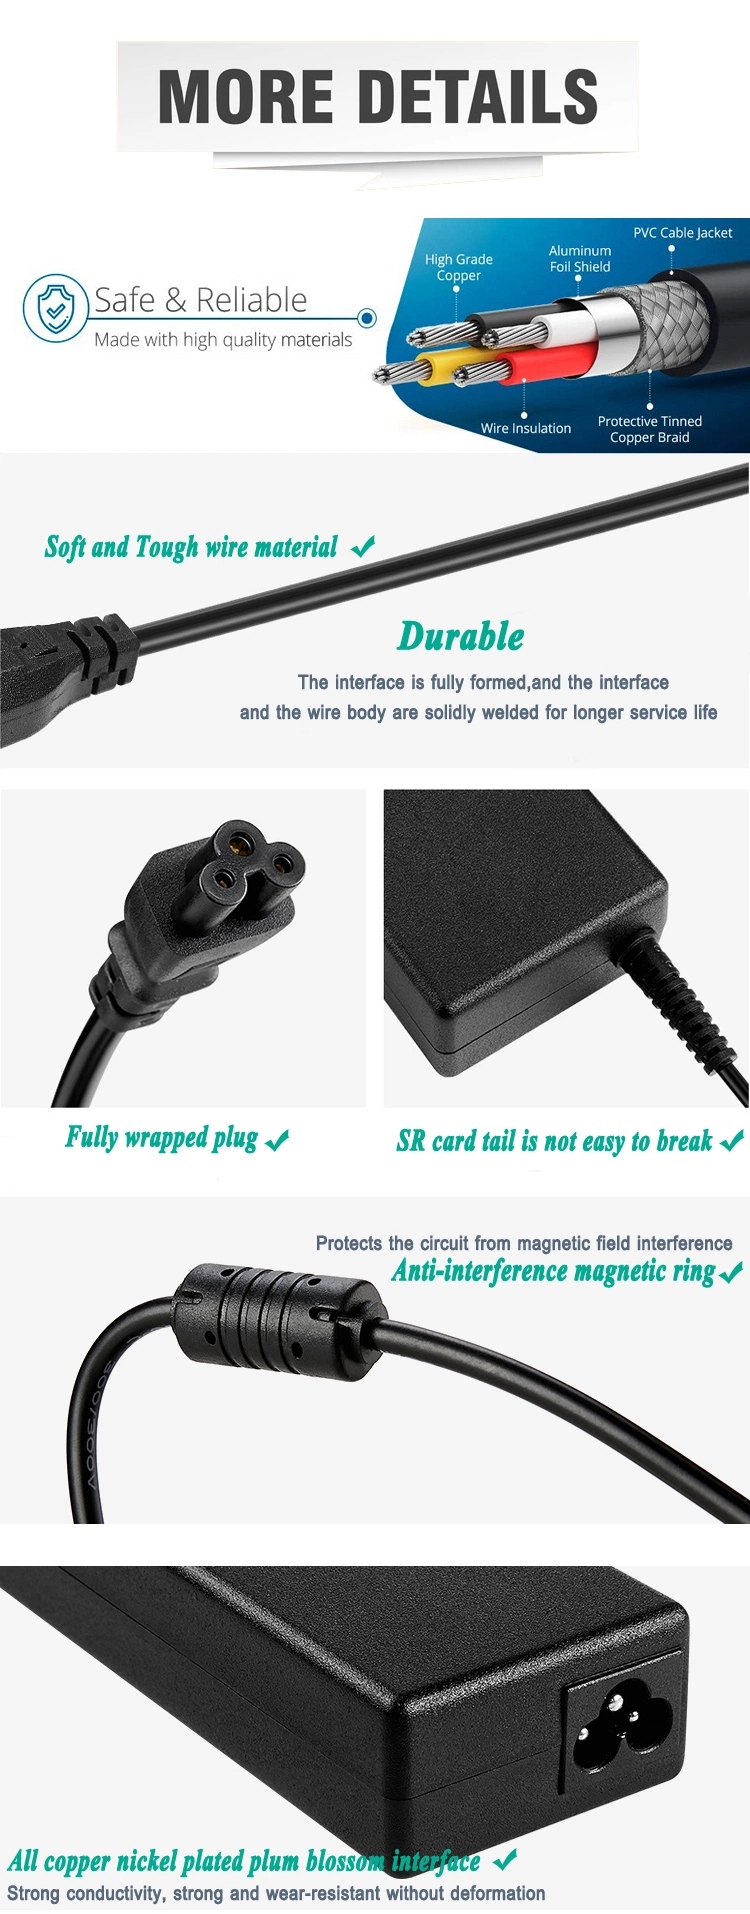 Hot Selling 19.5V 4.62A 90W Power Adaptor for DELL Laptop